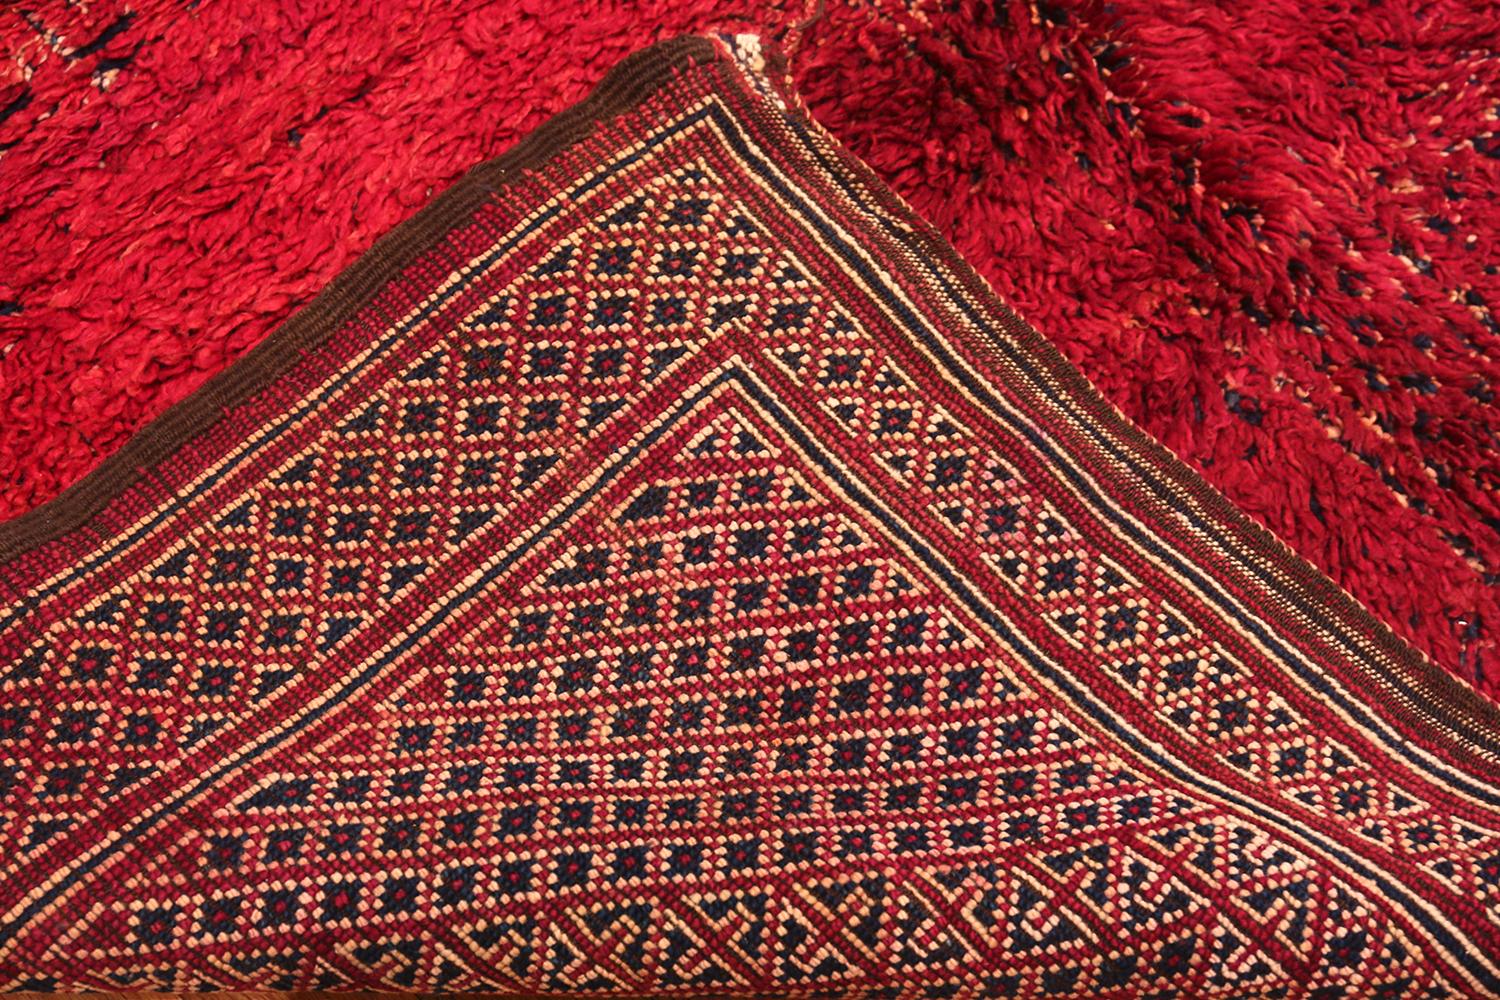 Vintage Red Moroccan Rug. 5 ft 7 in x 10 ft 10 in In Excellent Condition For Sale In New York, NY